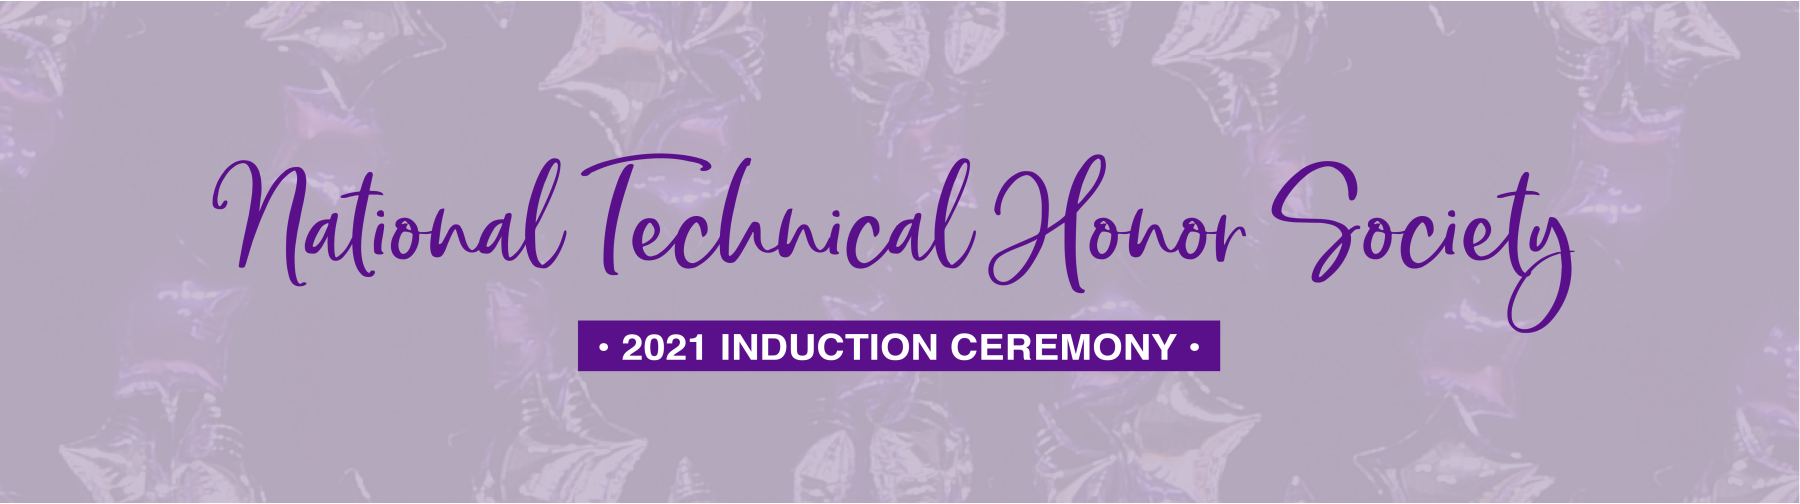 National Technical Honor Society 2021 Induction Ceremony